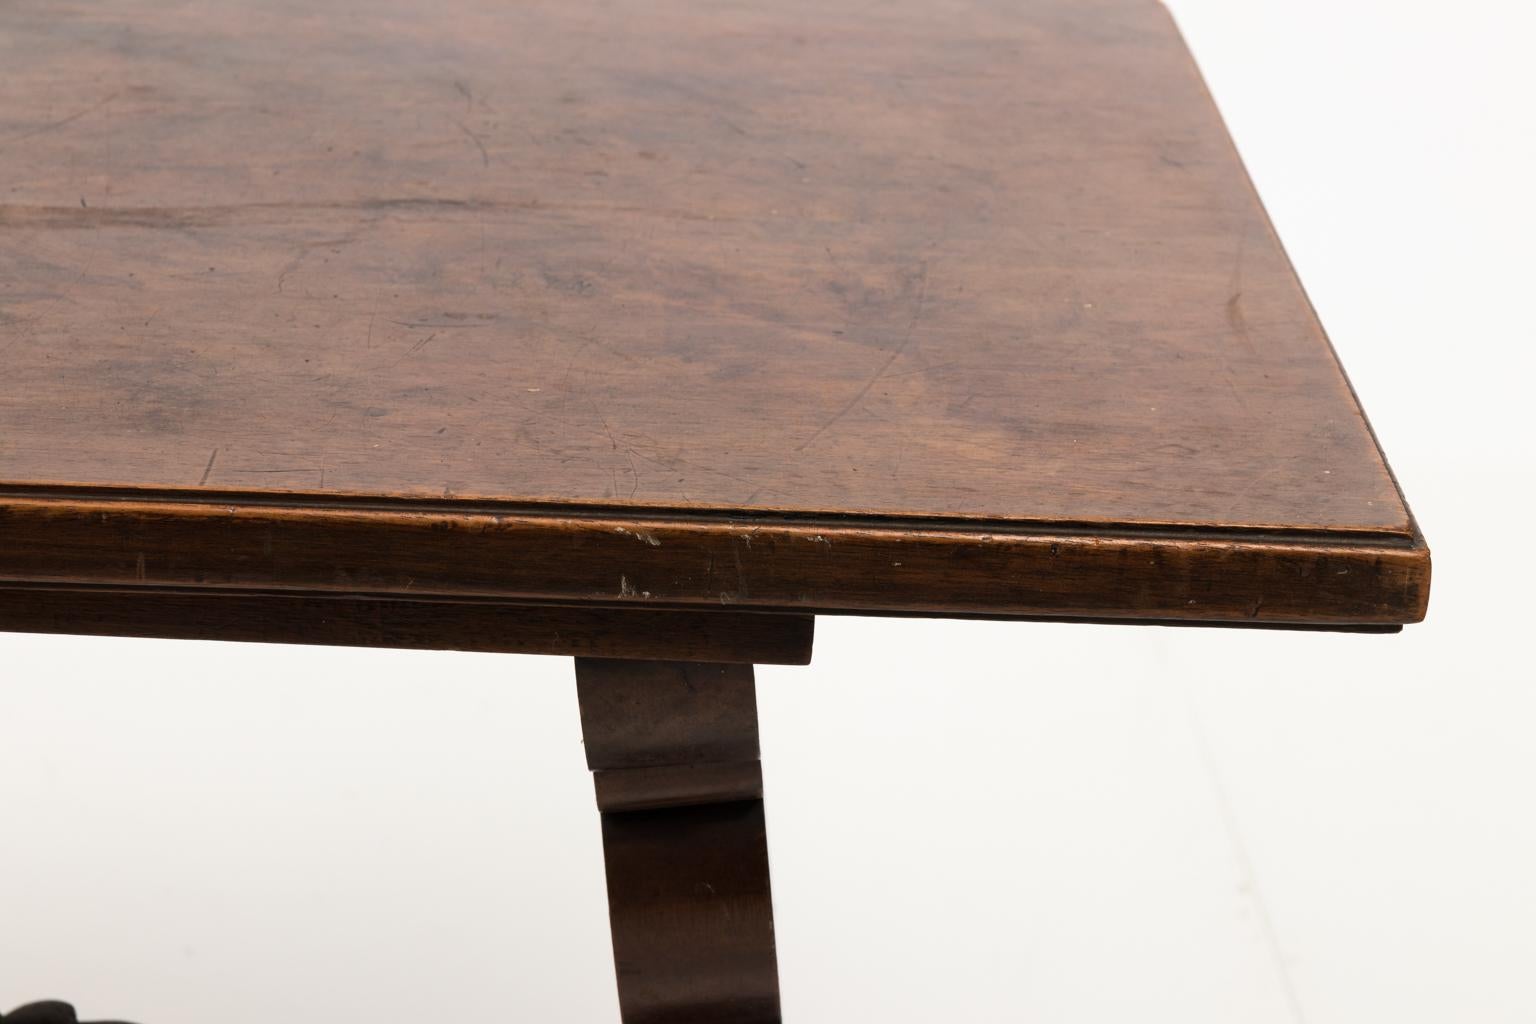 Italian Renaissance Style Walnut and Brass Trestle Coffee Table, circa 1950s For Sale 2